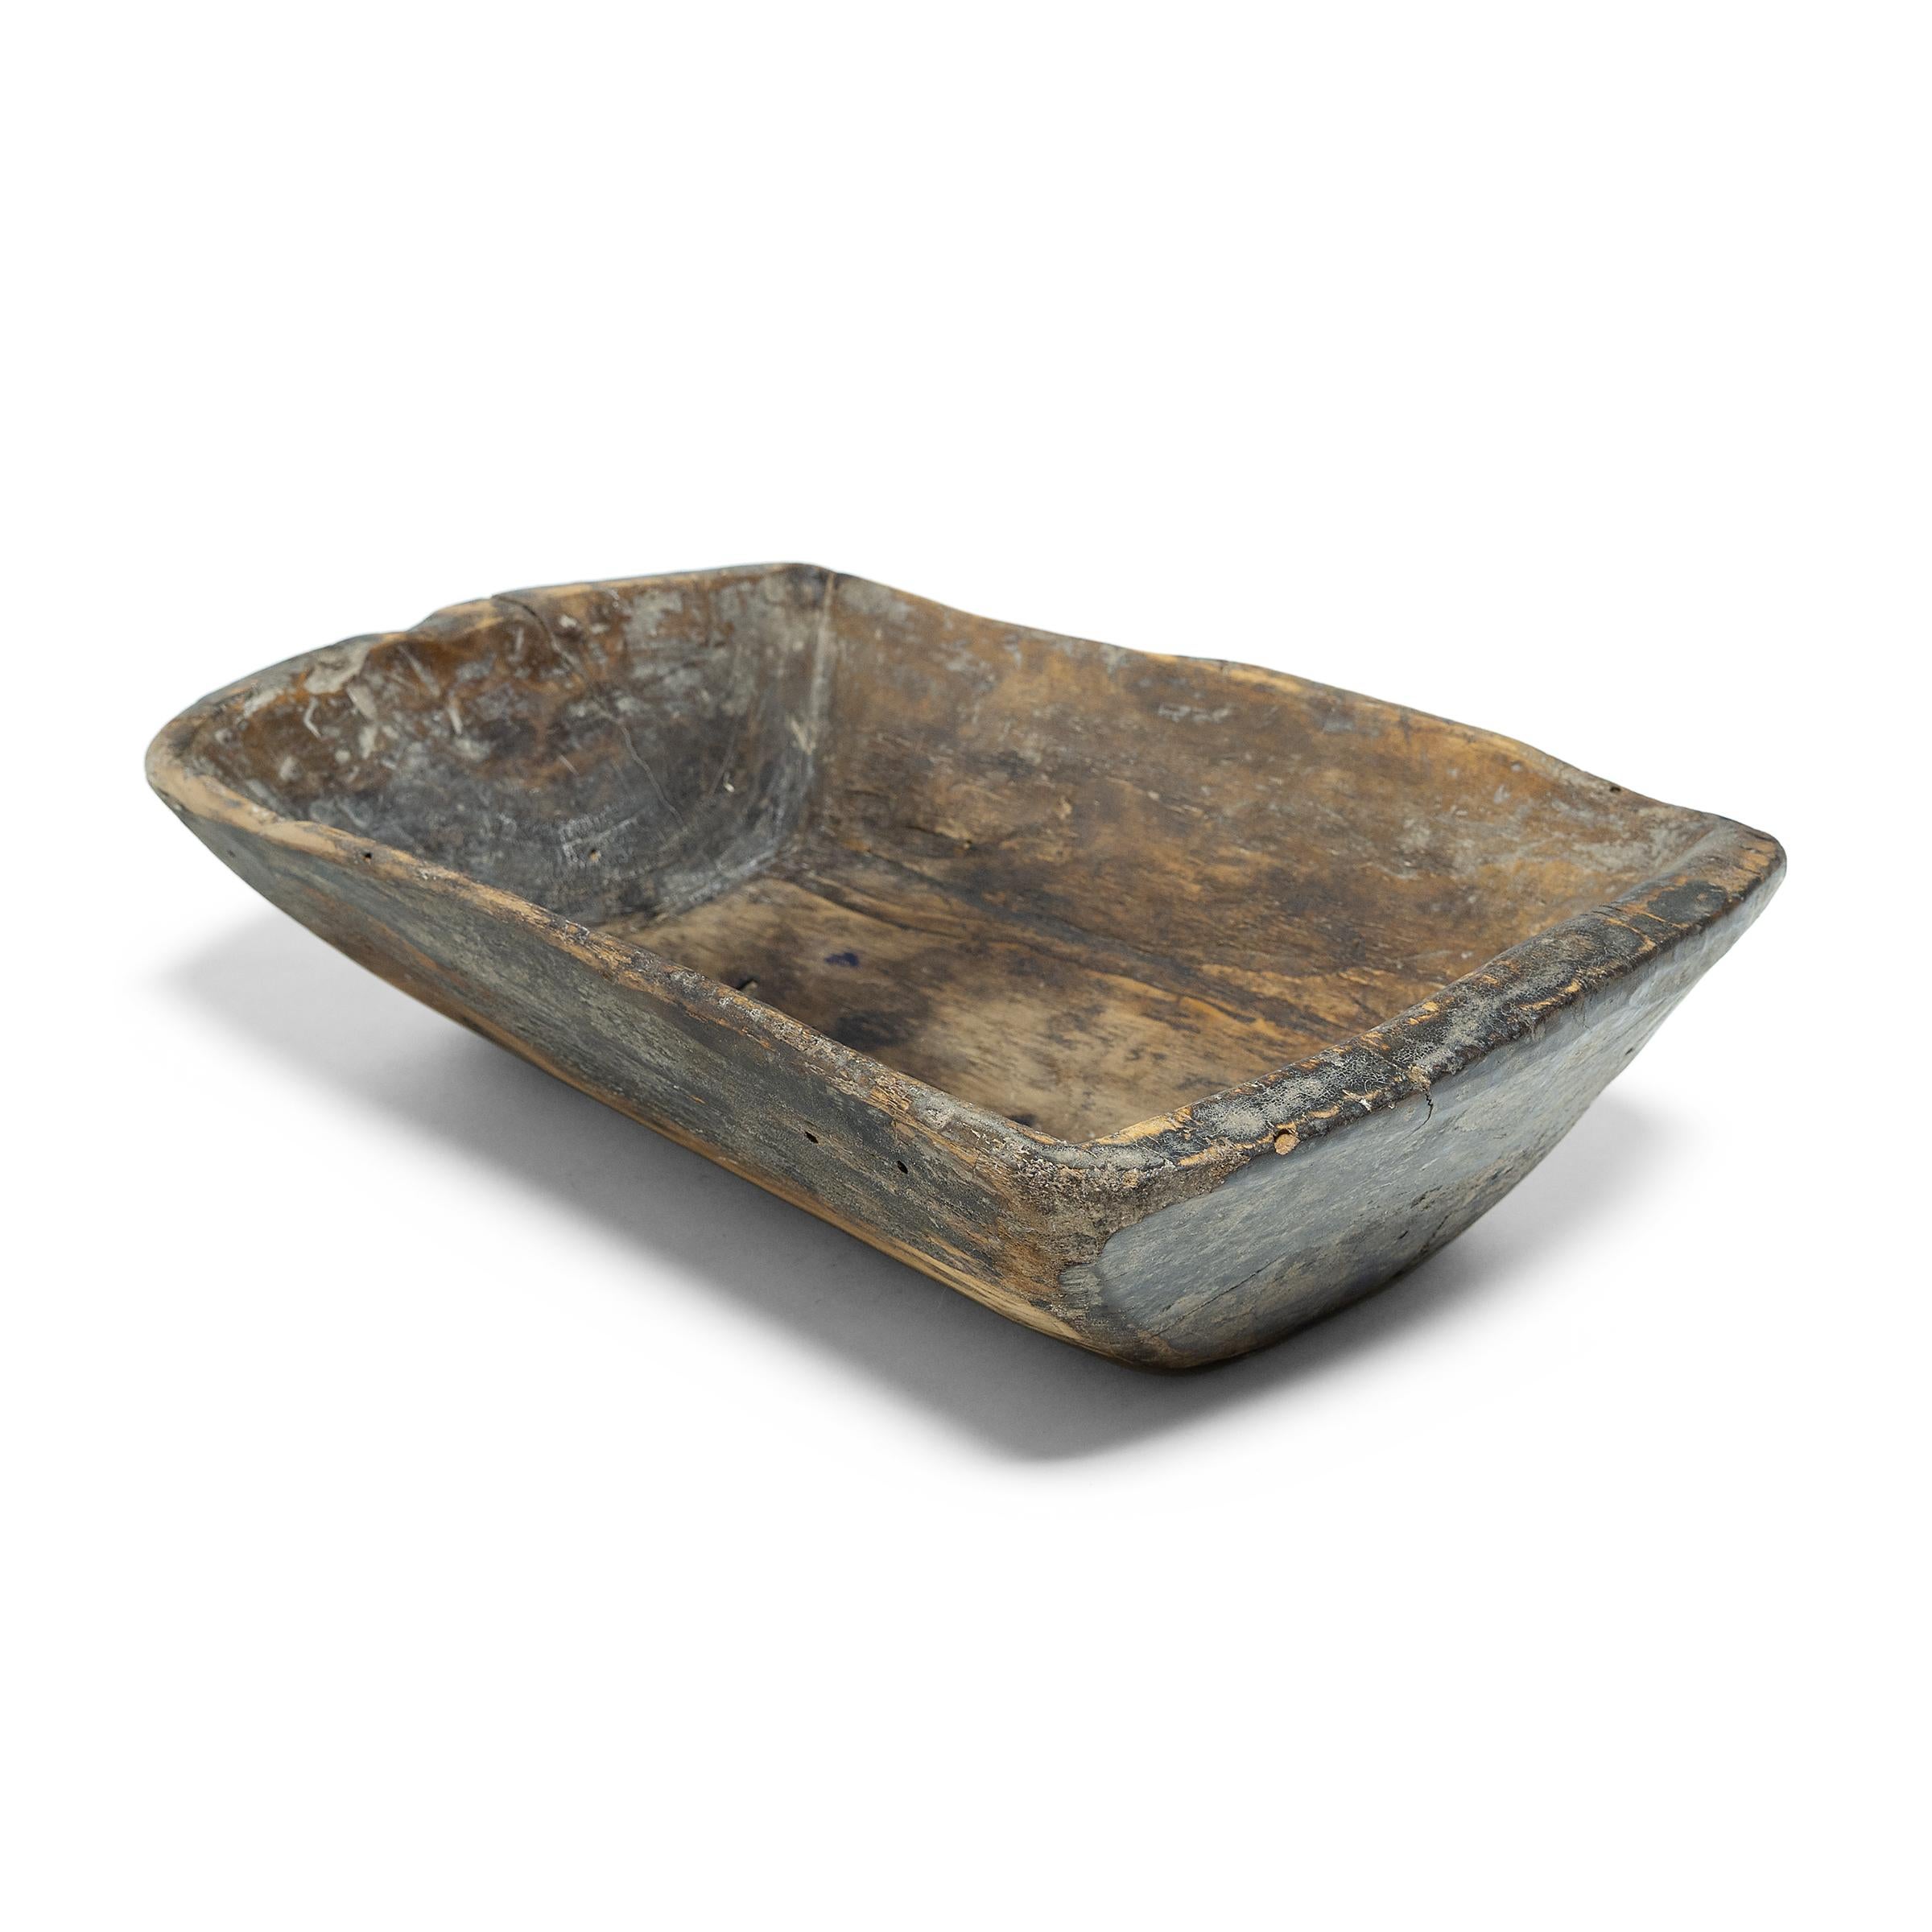 This wooden farm tray from northern China charms with its rustic finish and asymmetrical form. Hand-carved from a single block of wood, the large tray is truly one-of-a-kind, shaped with curved edges, tapered sides, and a deep interior basin. Years